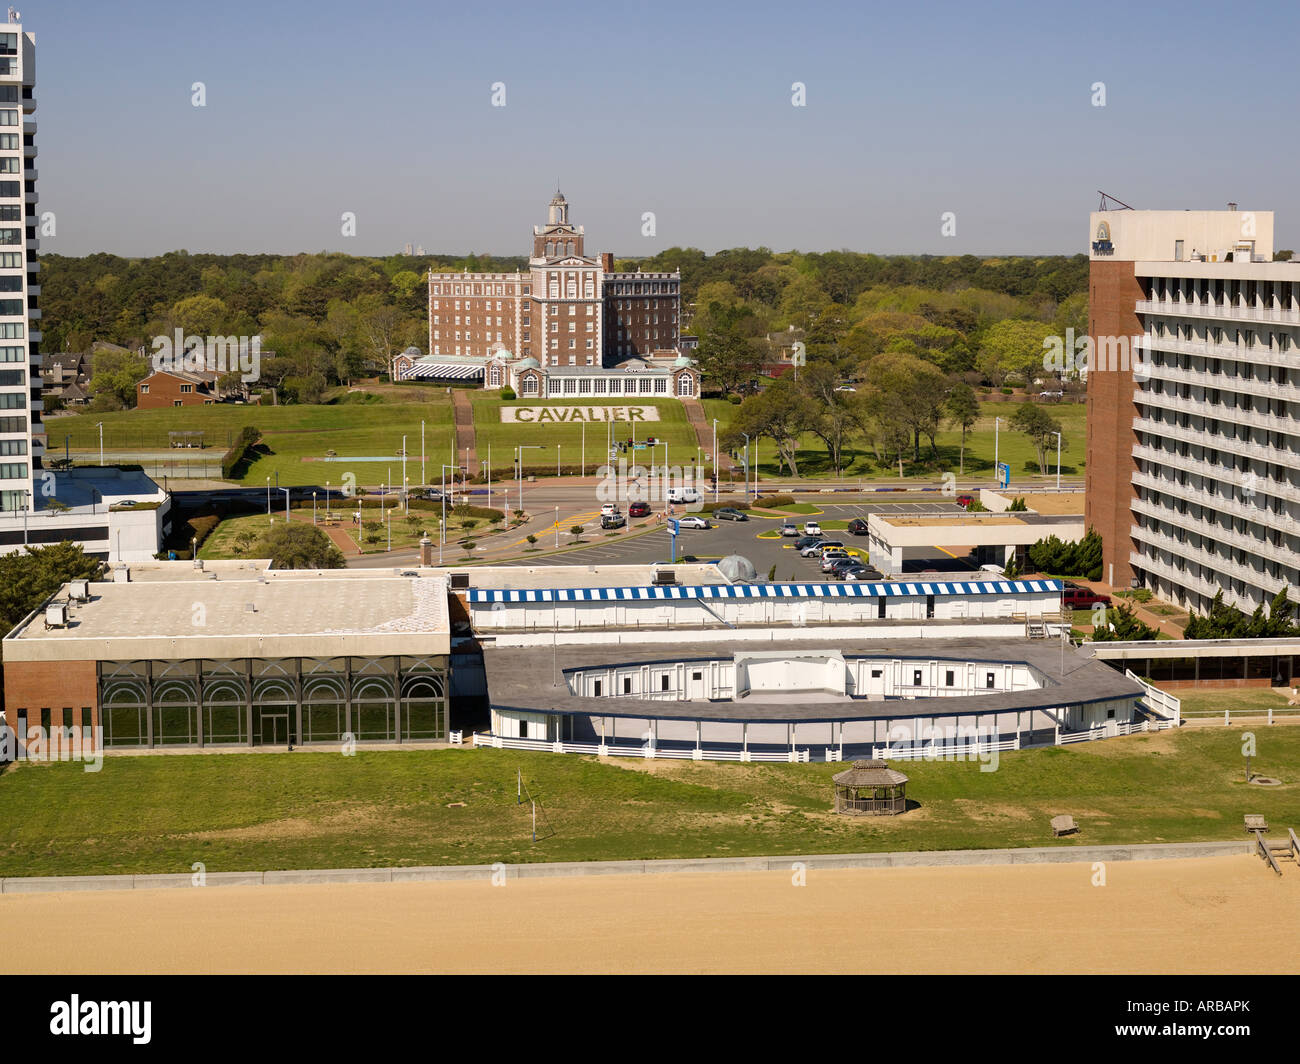 Cavalier Hotel buildings looking from the ocean looking east to west Stock Photo